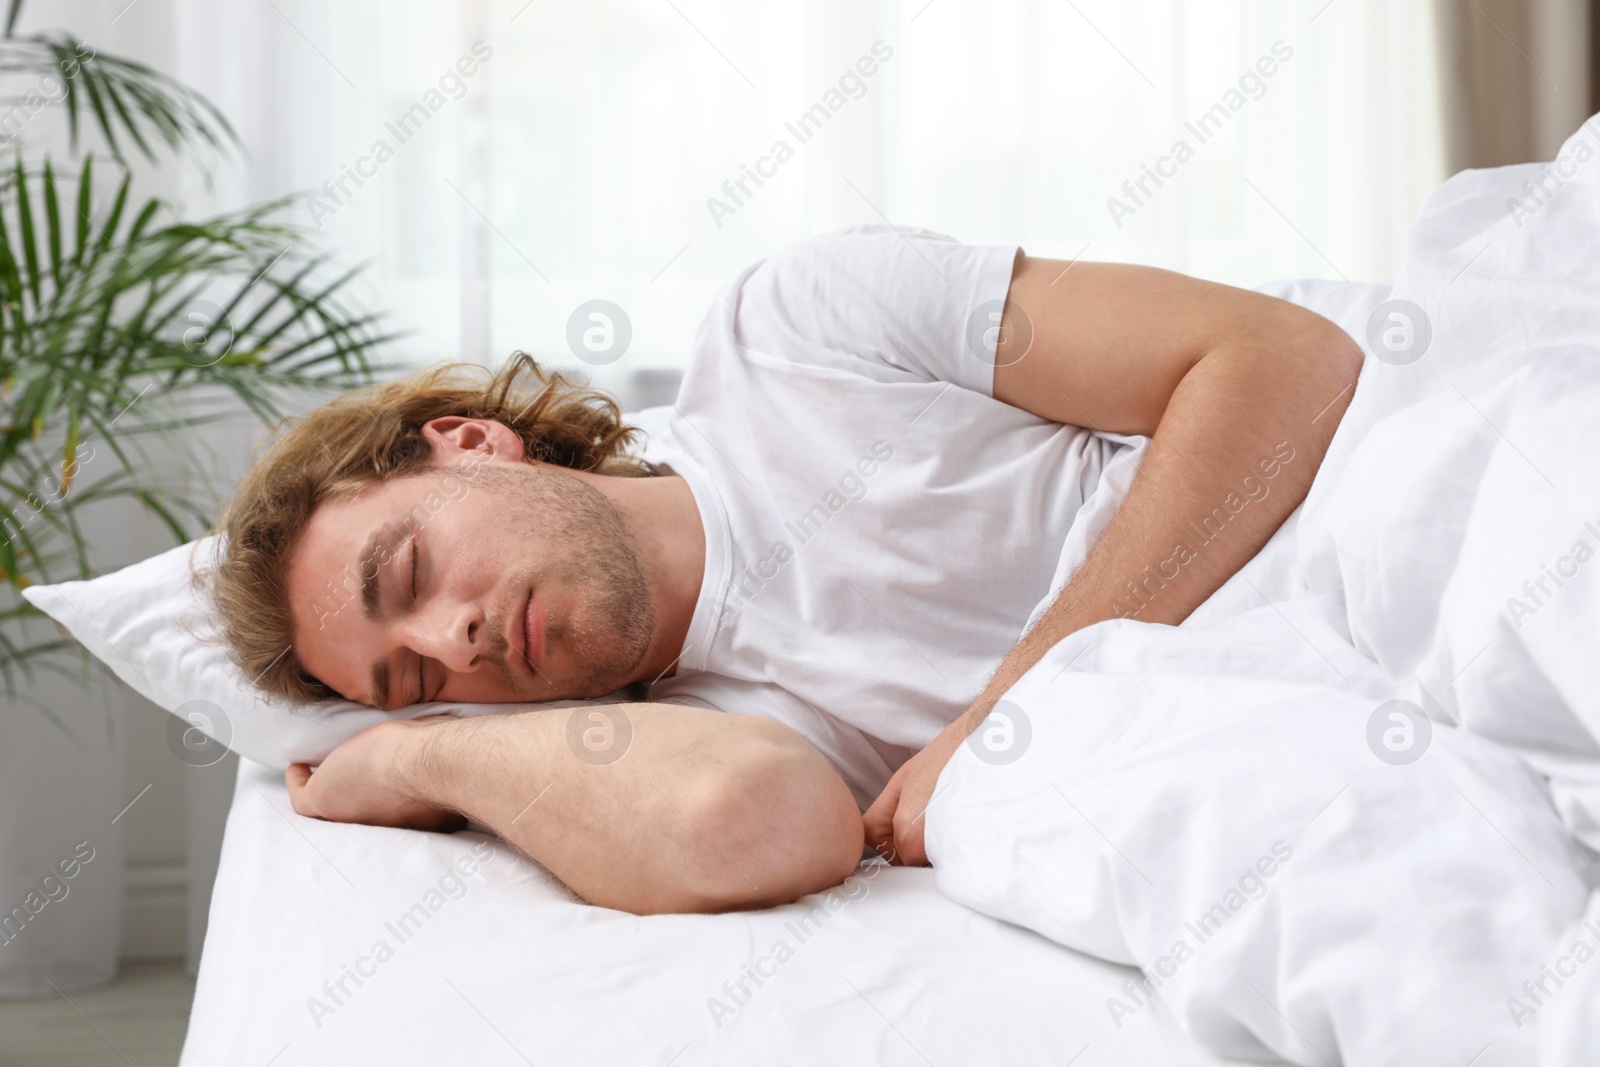 Photo of Handsome young man sleeping on pillow at home. Bedtime